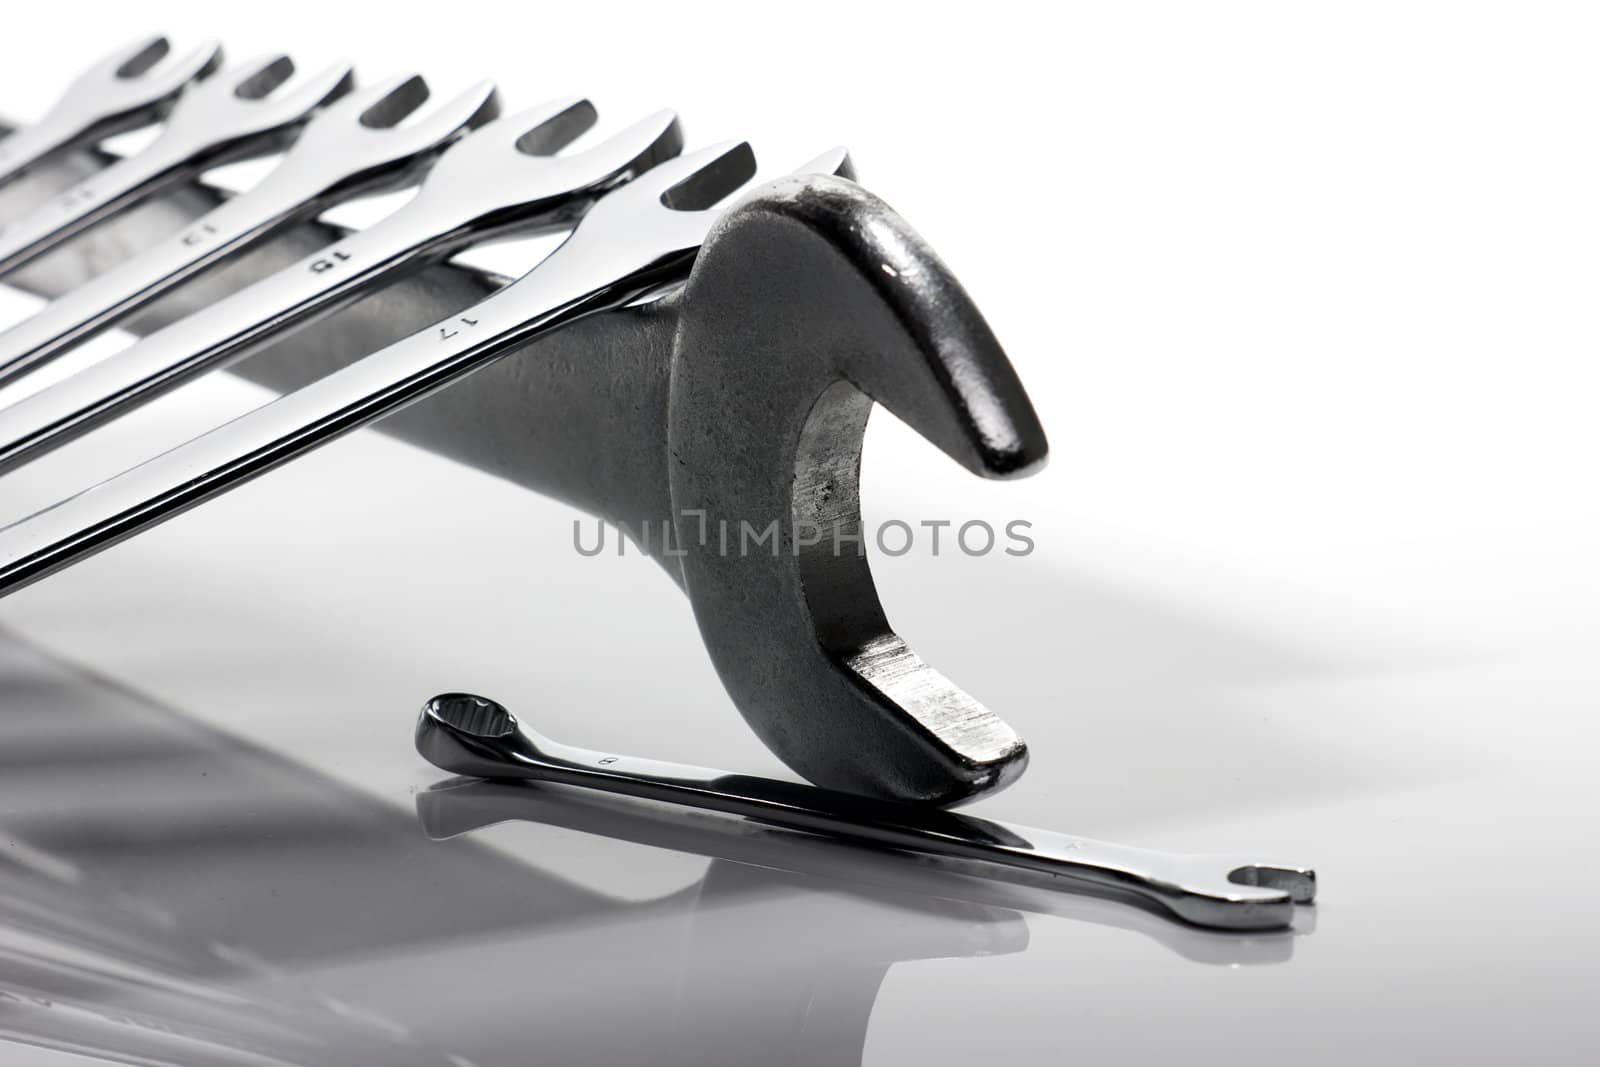 Some steel wrenches of different sizes on a white background